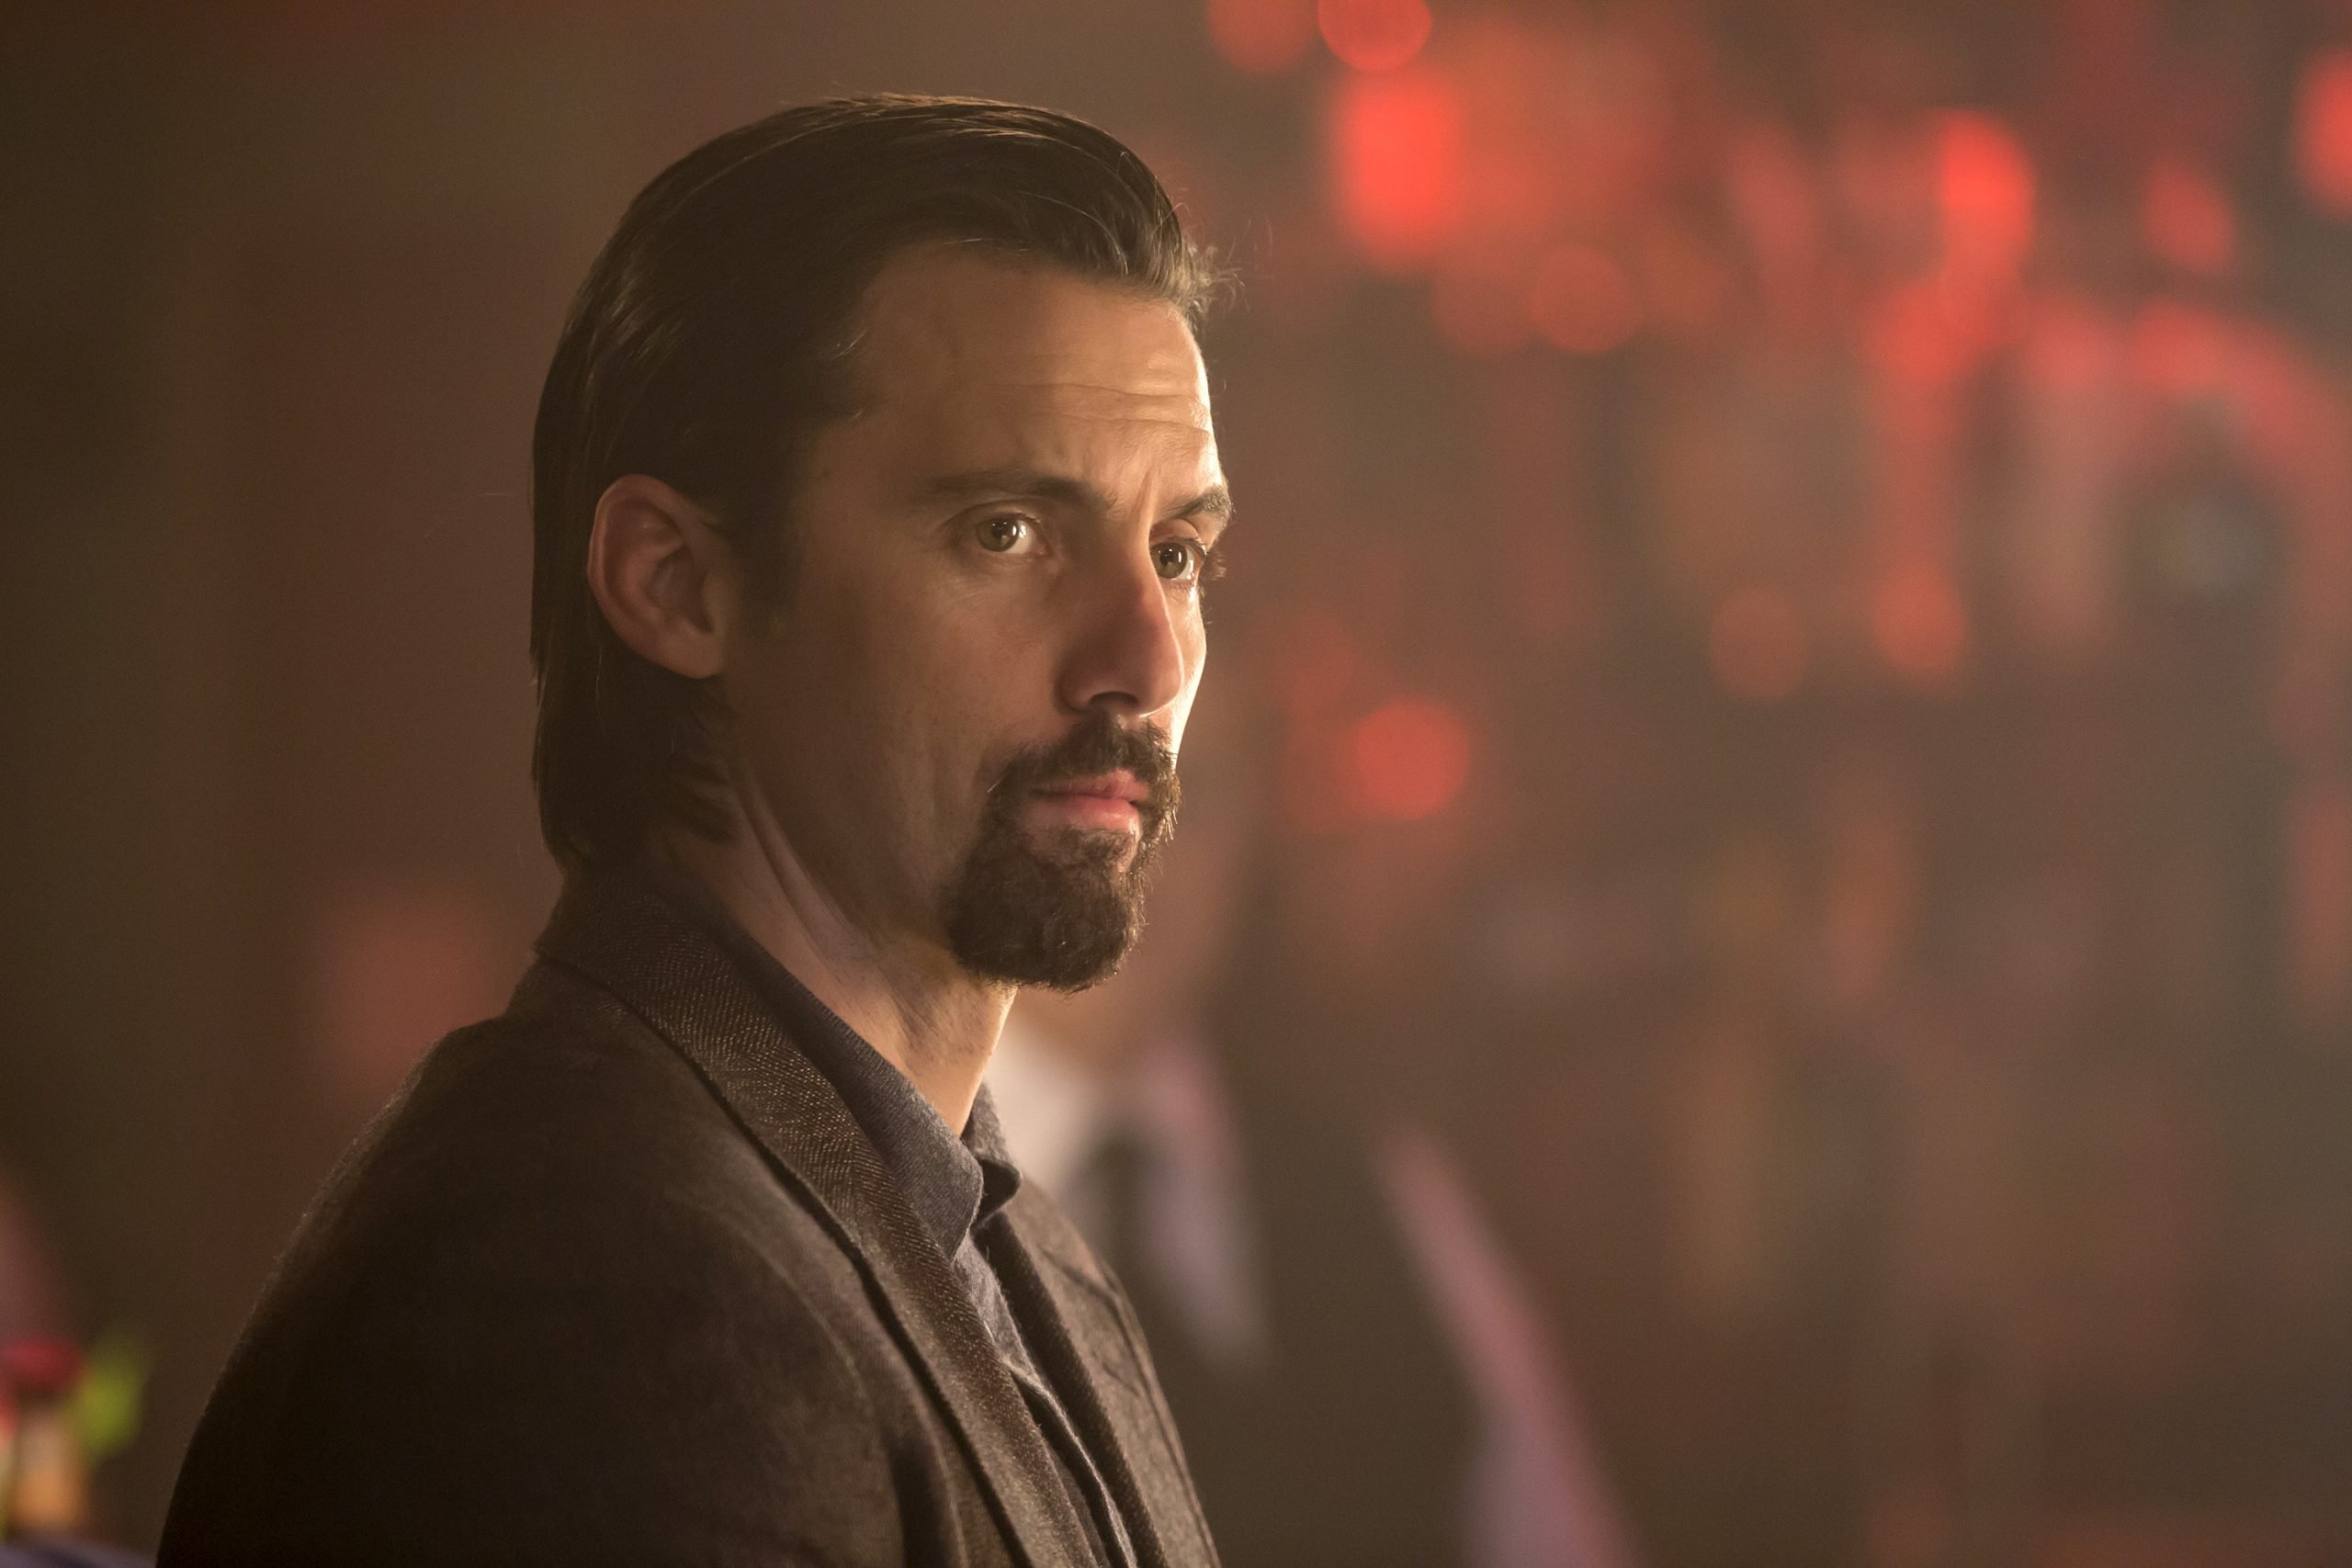 Milo Ventimiglia, in character as Jack in 'This Is Us' Season 1, wears